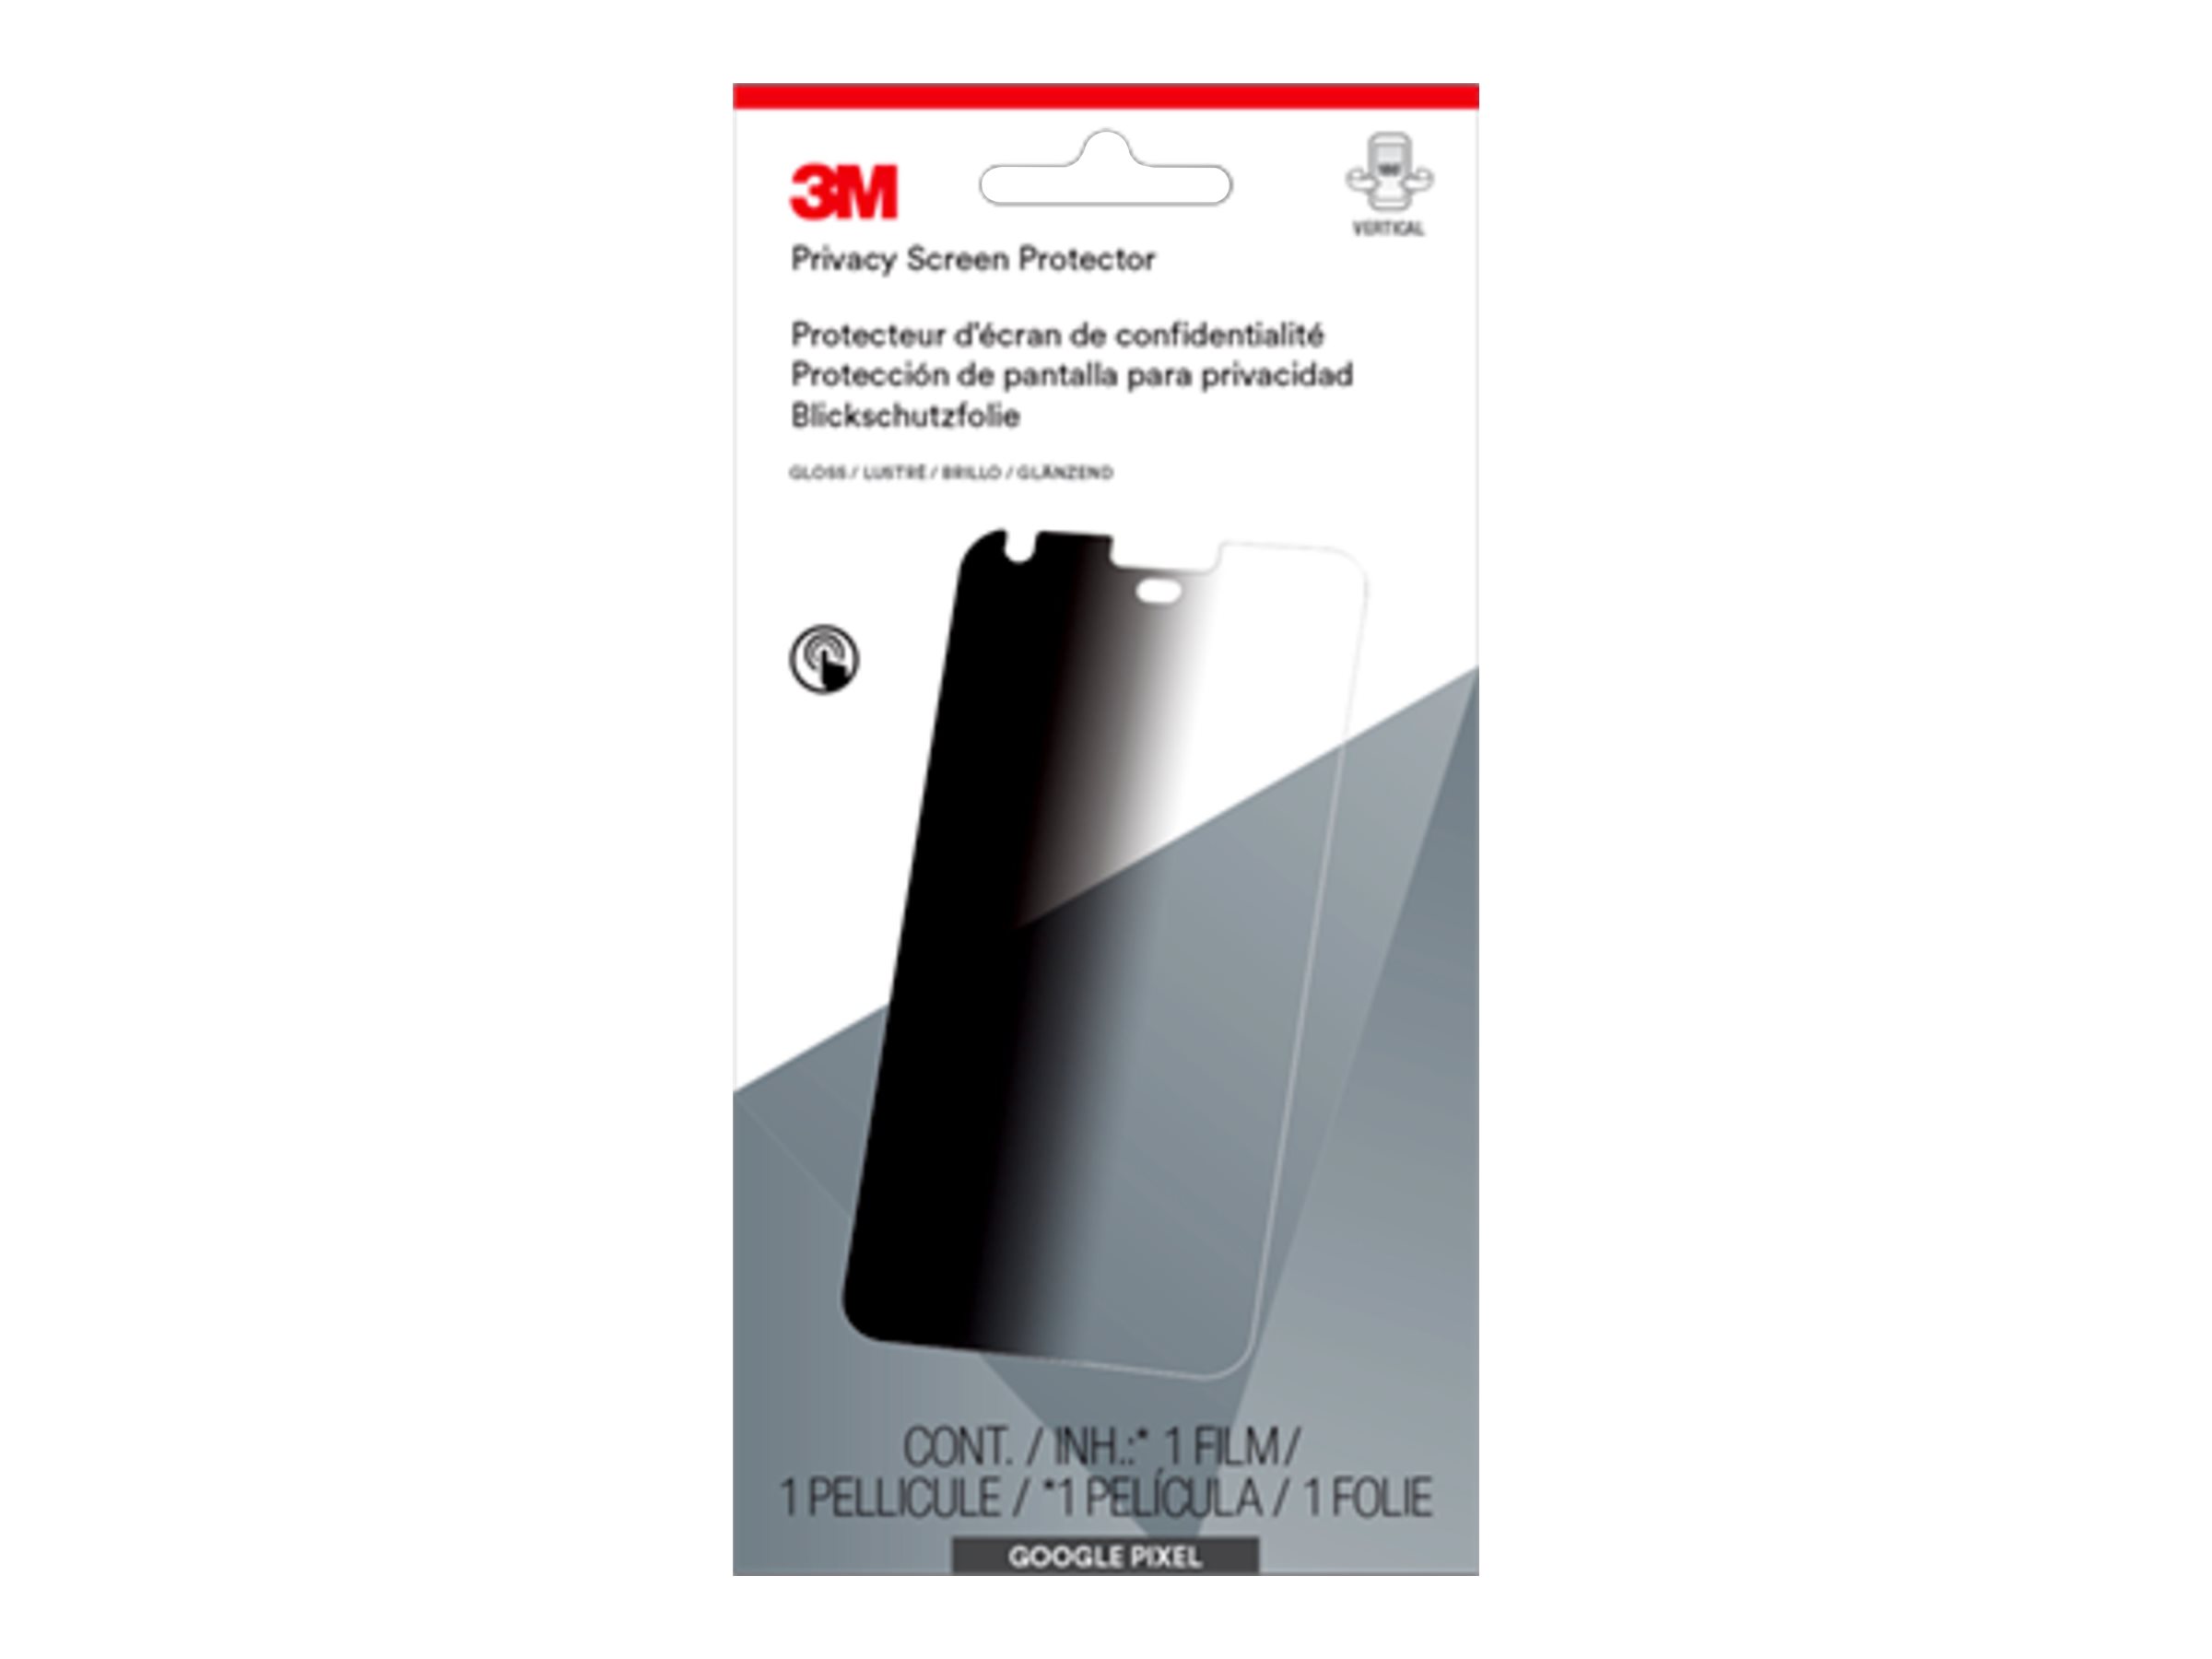 3M MPPGG003 Privacy Screen Protector for Google Pixel Phone - image 2 of 2